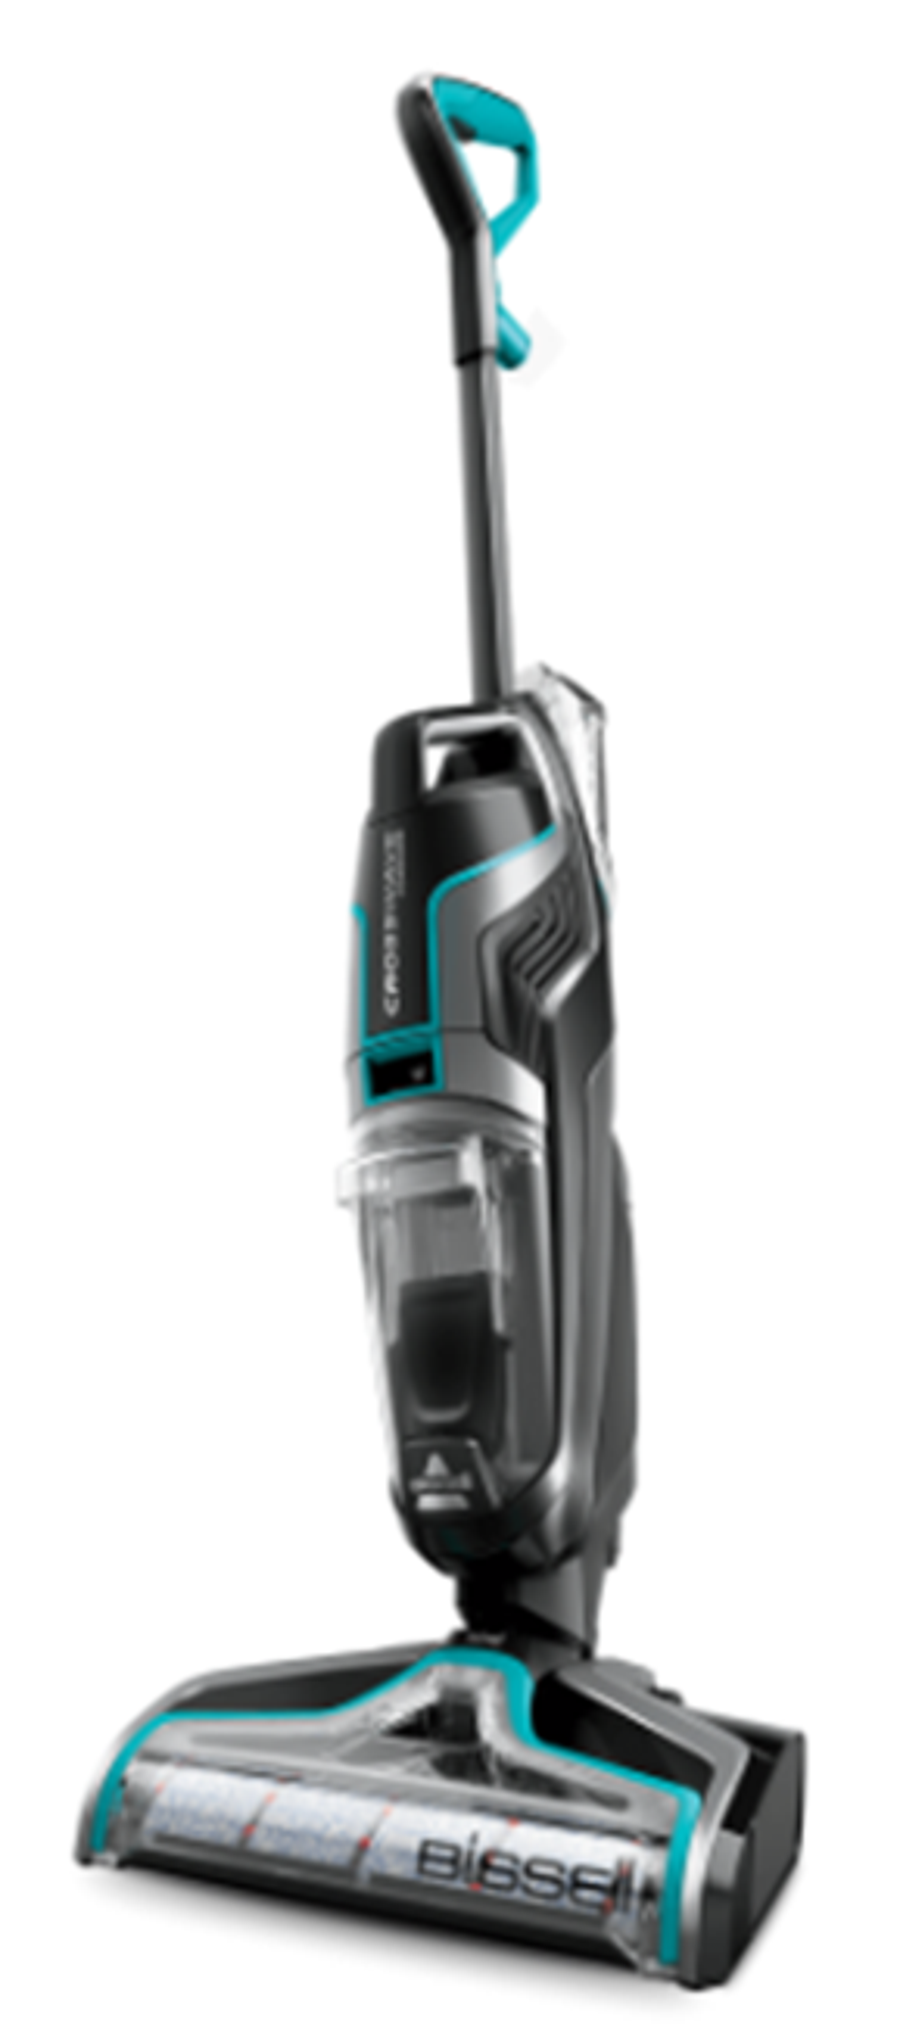 Bissell is recalling select vacuum cleaners over a fire rislk.